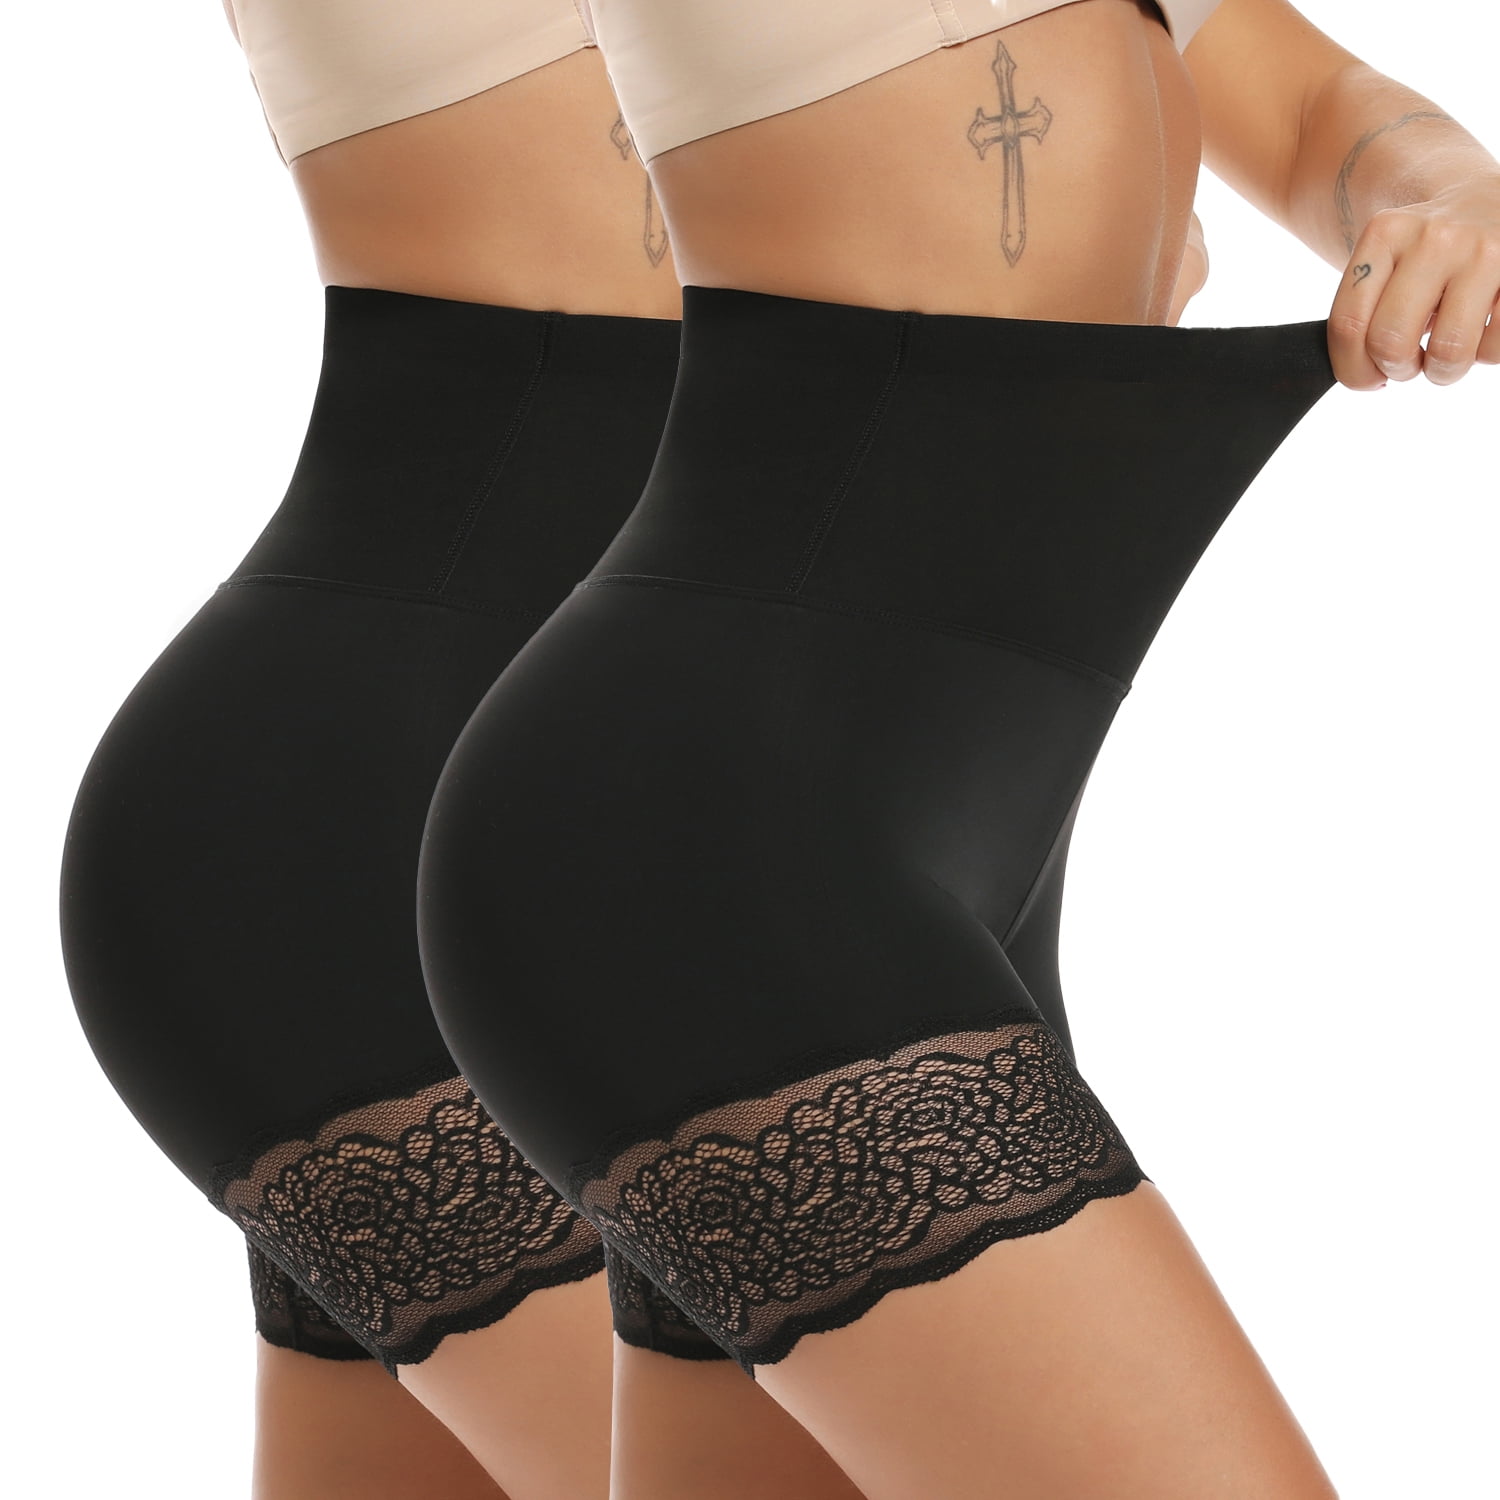 Seedom Women Body Shaper High Waist Padded Hips Butt Lifting Breathable  Crotch Laced Panties Slimming Shapewear Shorts price in UAE,  UAE